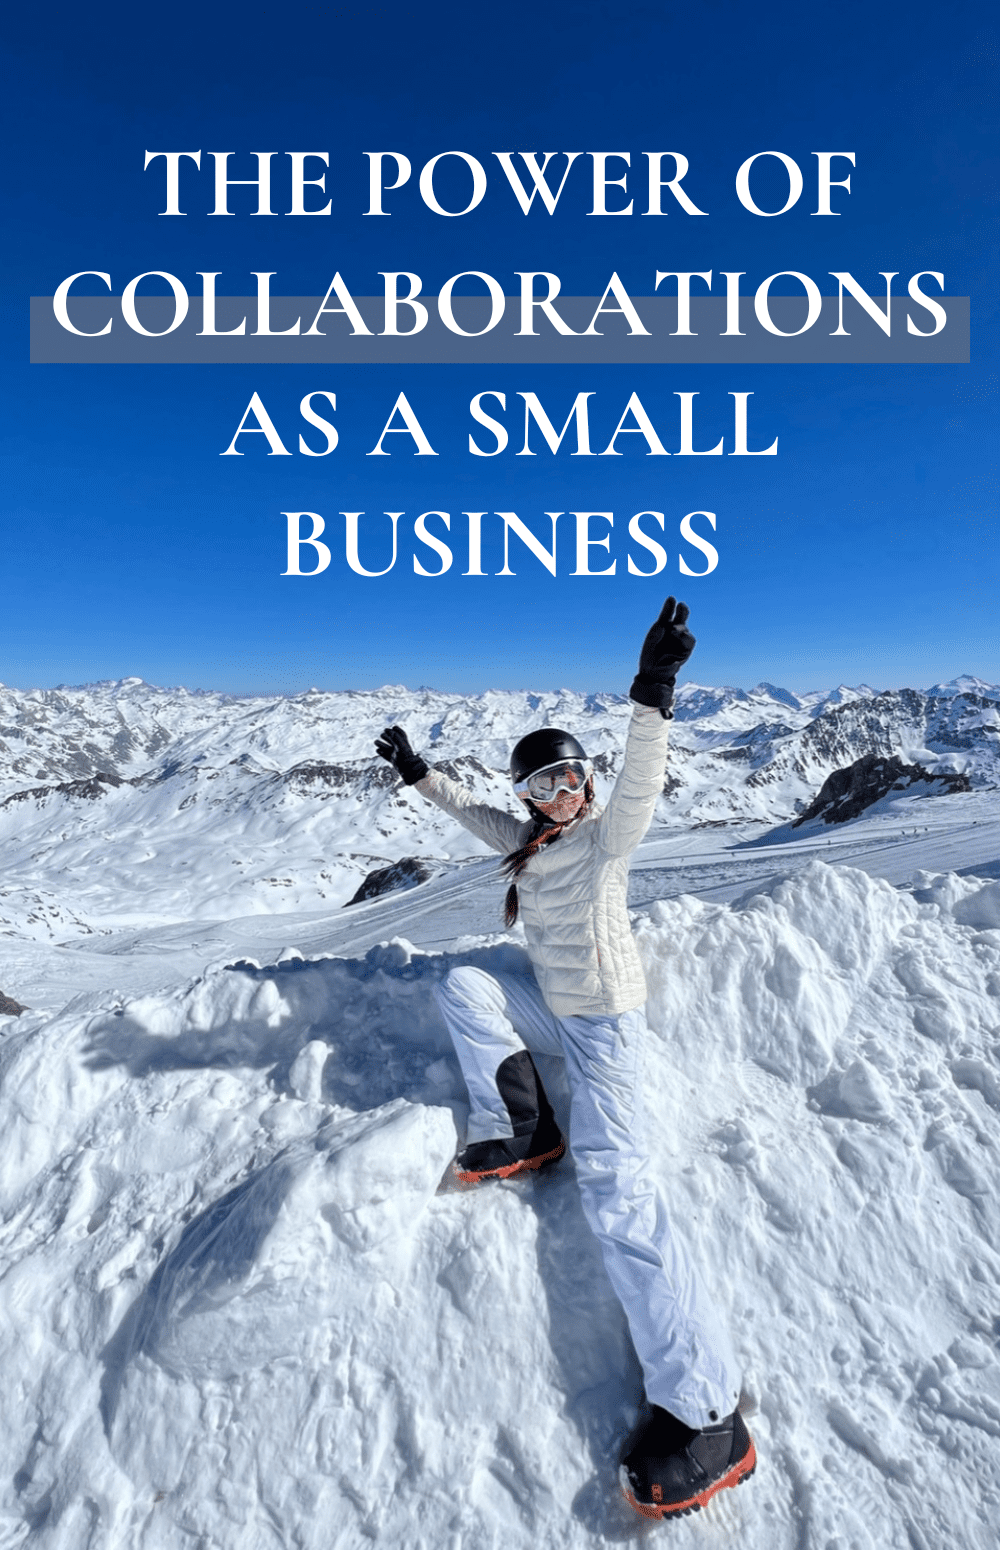 The Power of Networking and Collaboration for Small Business Owners